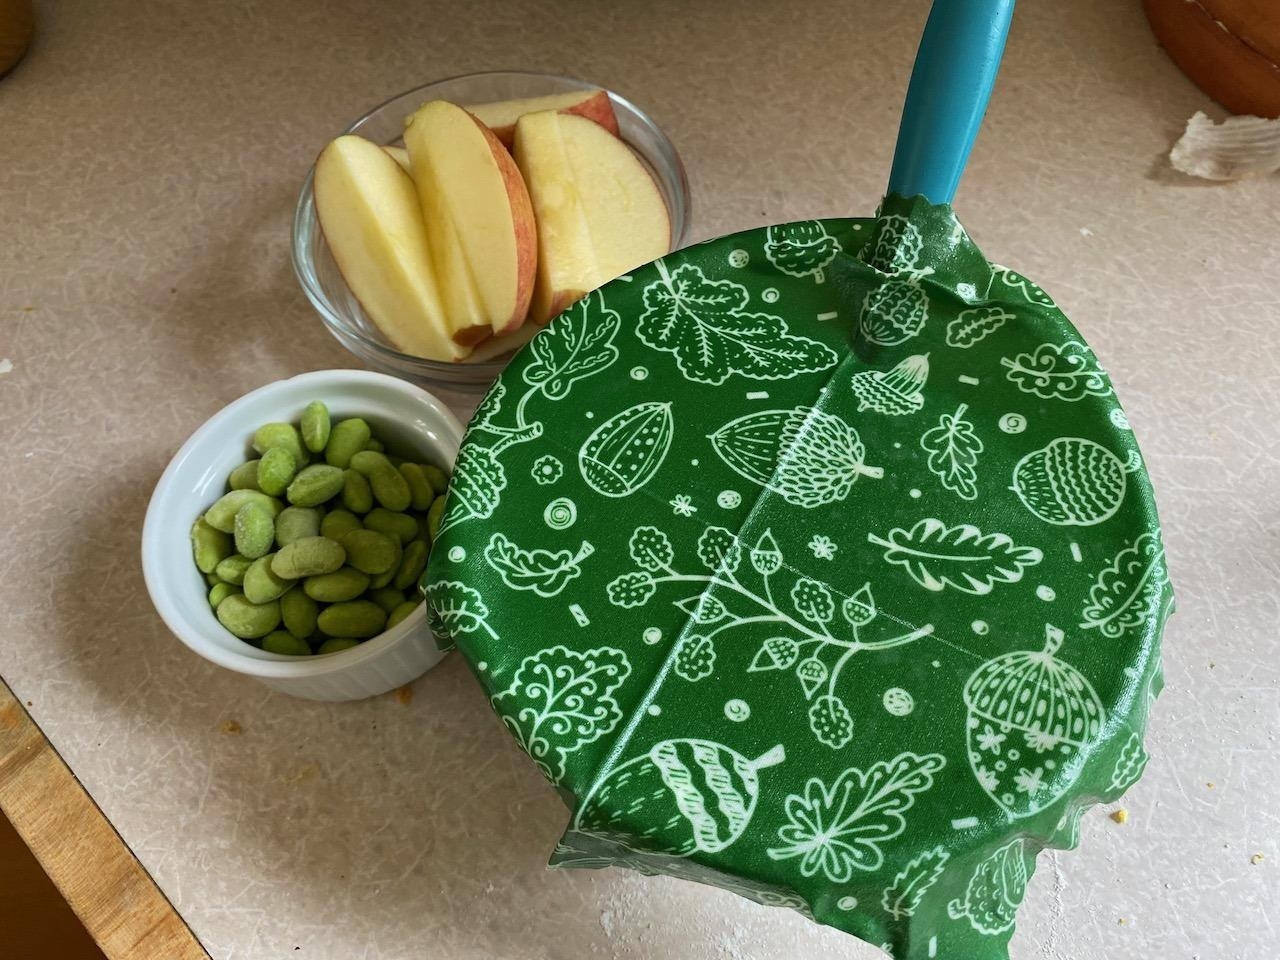 Reviewer image of green patterned beeswax wrap covering a bowl, next to two small bowls